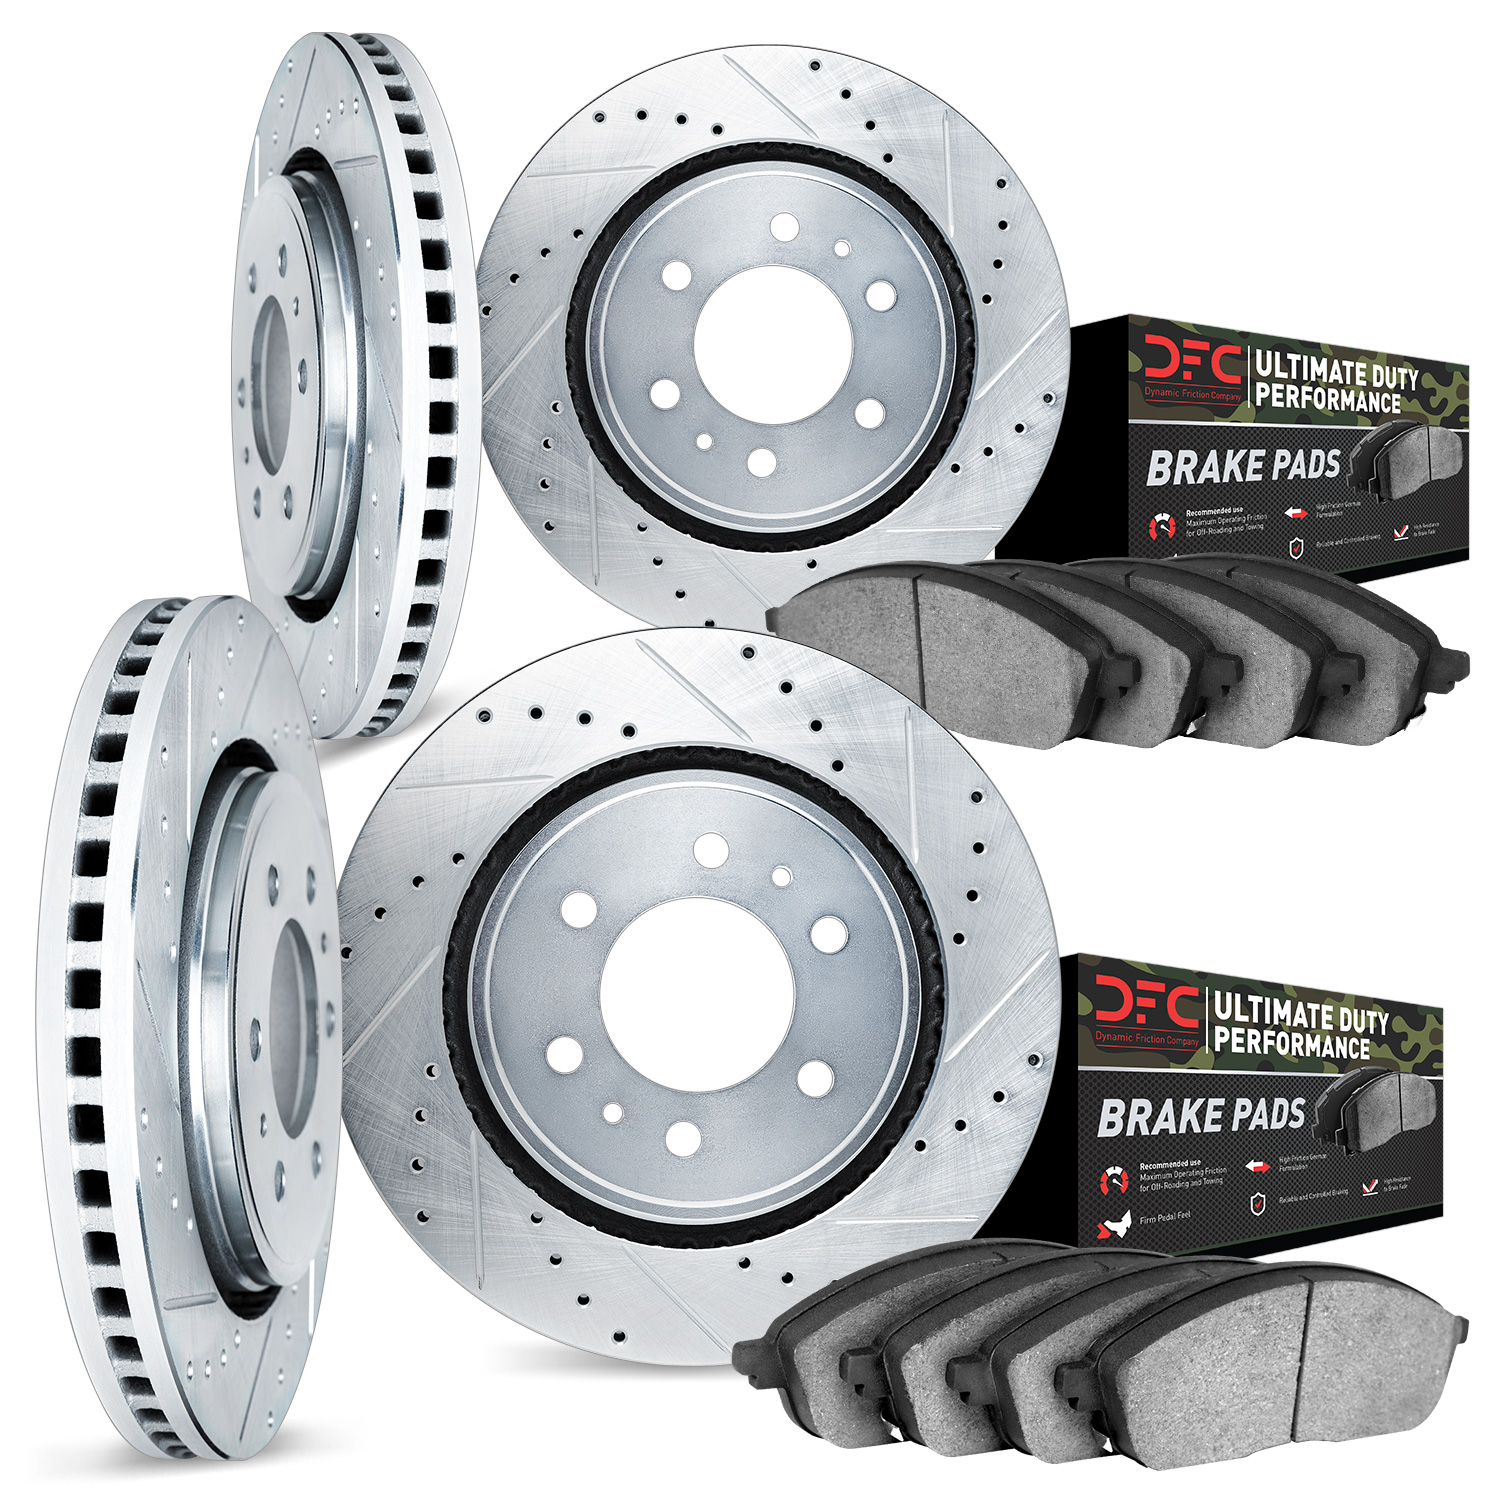 7404-48003 Drilled/Slotted Brake Rotors with Ultimate-Duty Brake Pads Kit [Silver], 1999-2007 GM, Position: Front and Rear